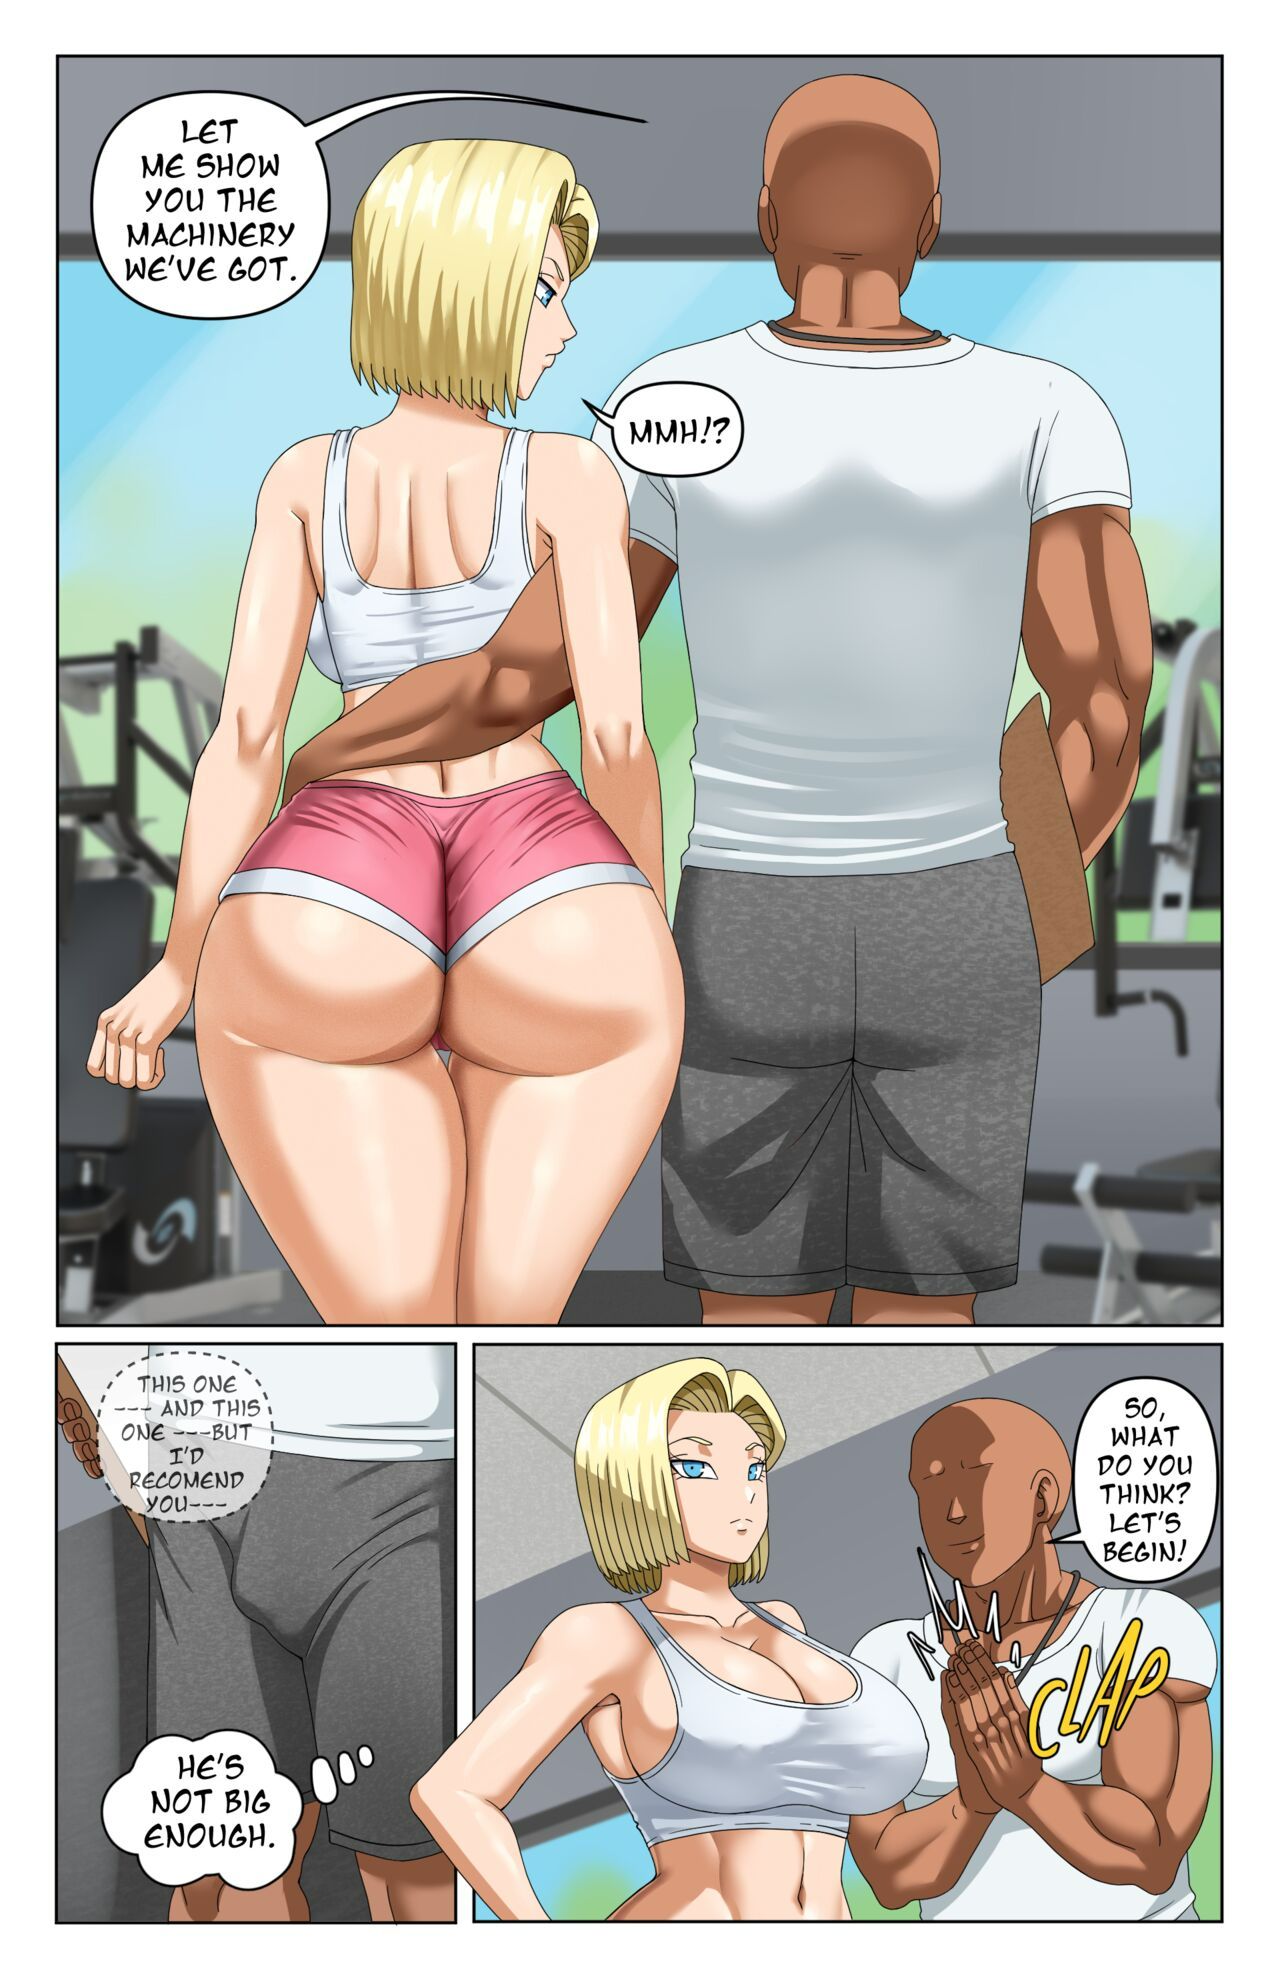 Android 18 NTR Part 3 Porn Comic english 04